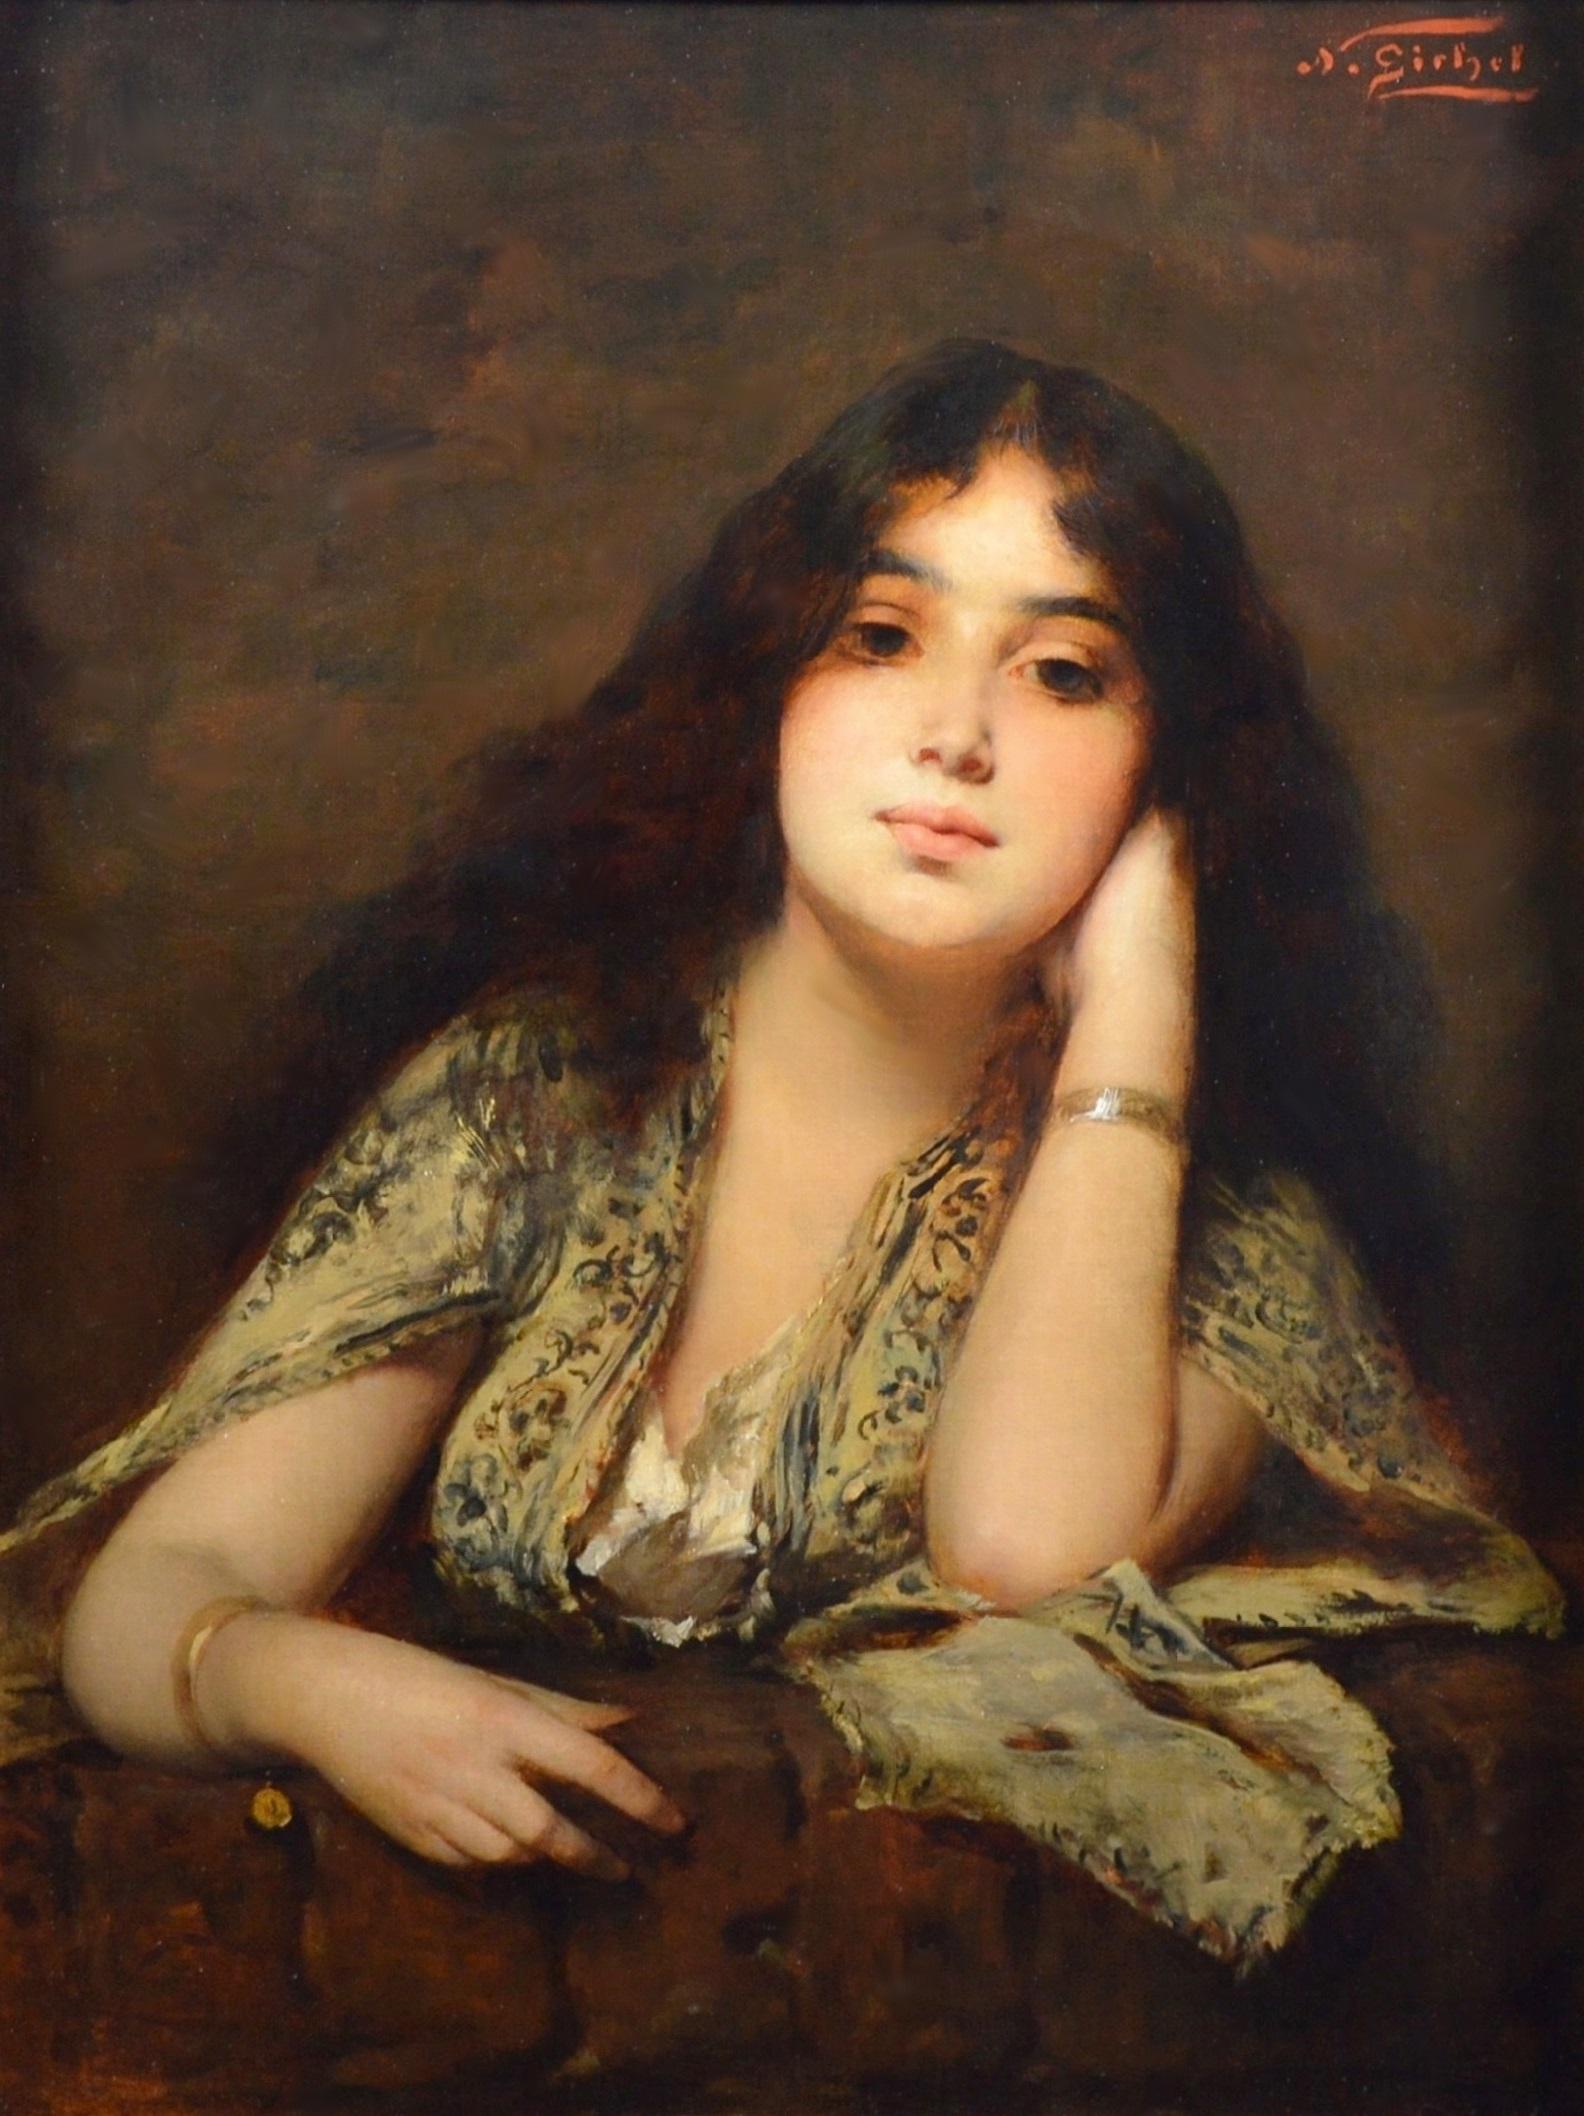 Montenegrin Girl - 19th Century Portrait Oil Painting of Orientalist Beauty - Black Figurative Painting by Nathaniel Sichel